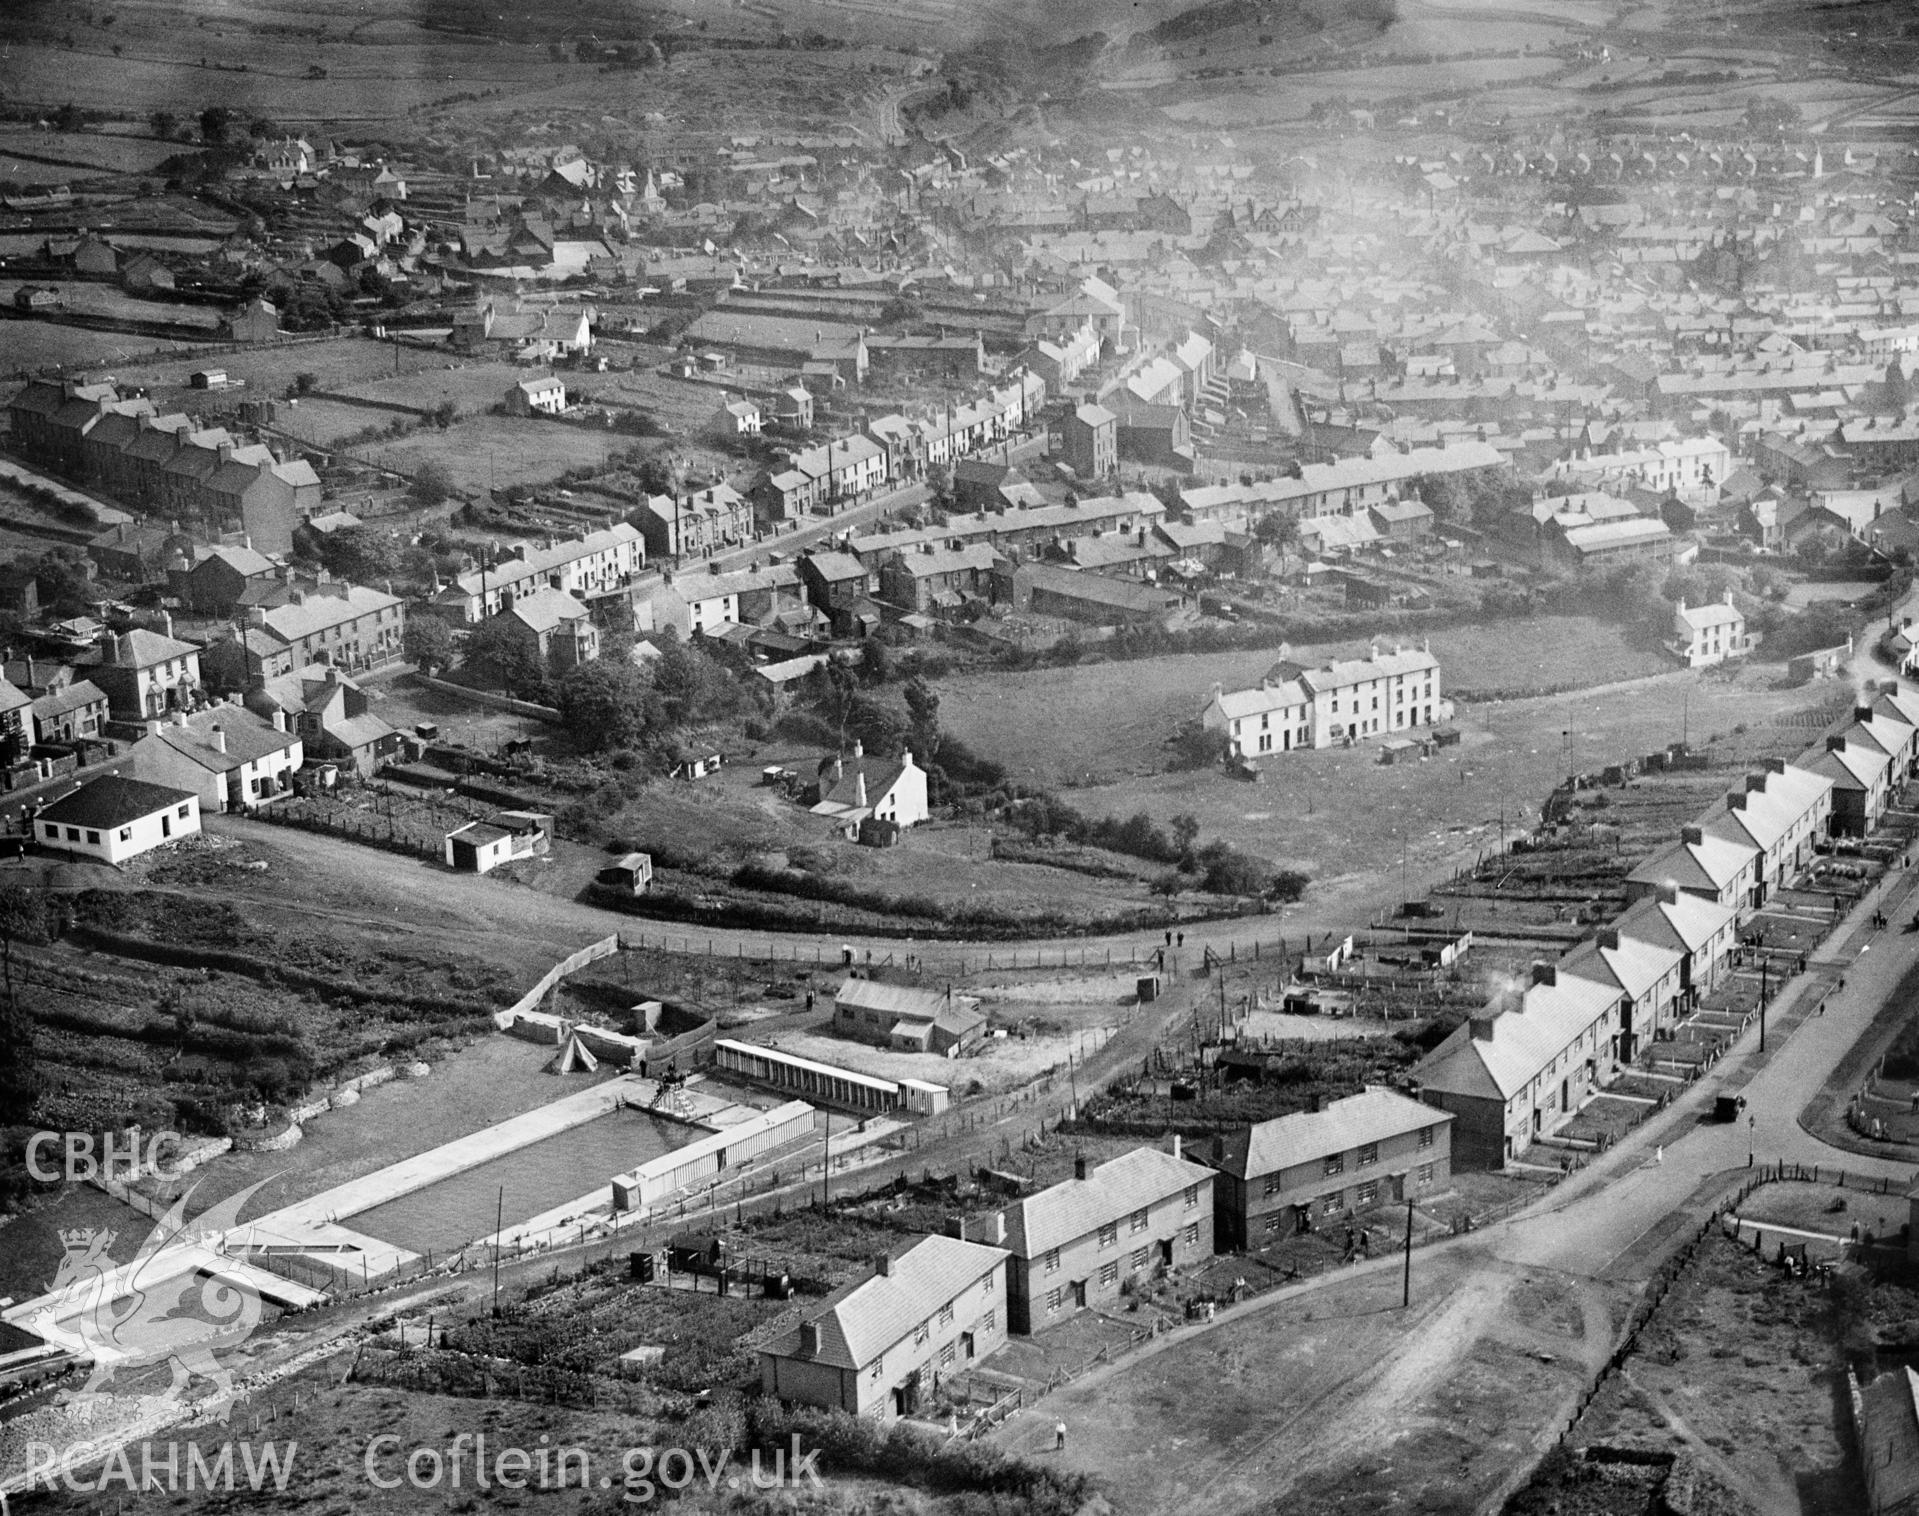 View of Brynmawr showing newly completed swimming pool and council houses, oblique aerial view. 5?x4? black and white glass plate negative.